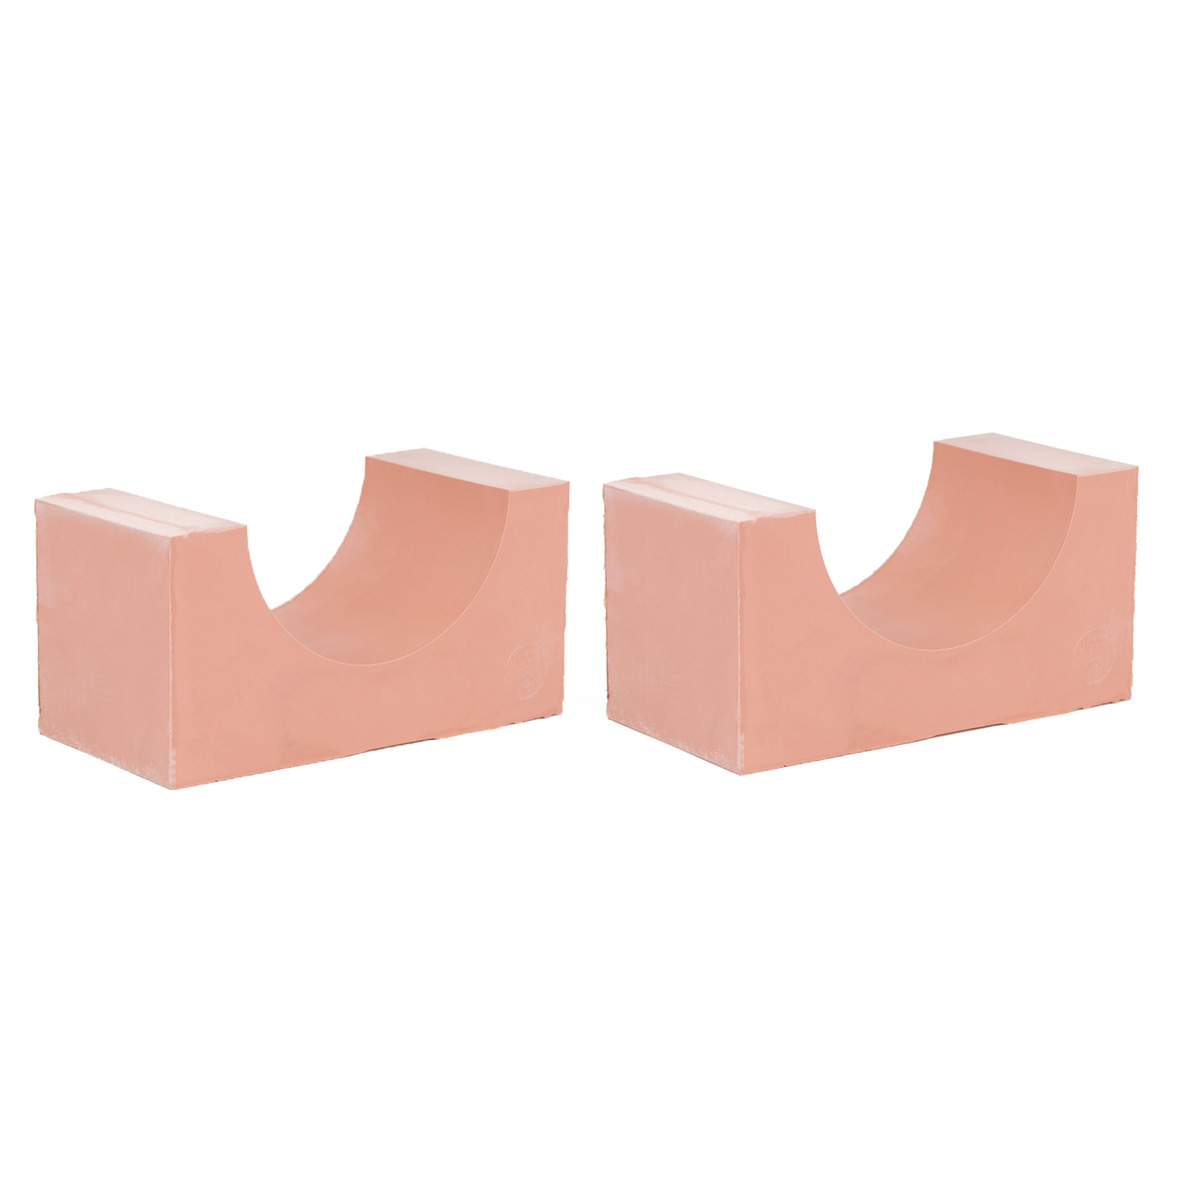 120-80*2 Set of 2 half insert block lycron, 120-80 for cable/pipe diam. 79.5-81.5mm